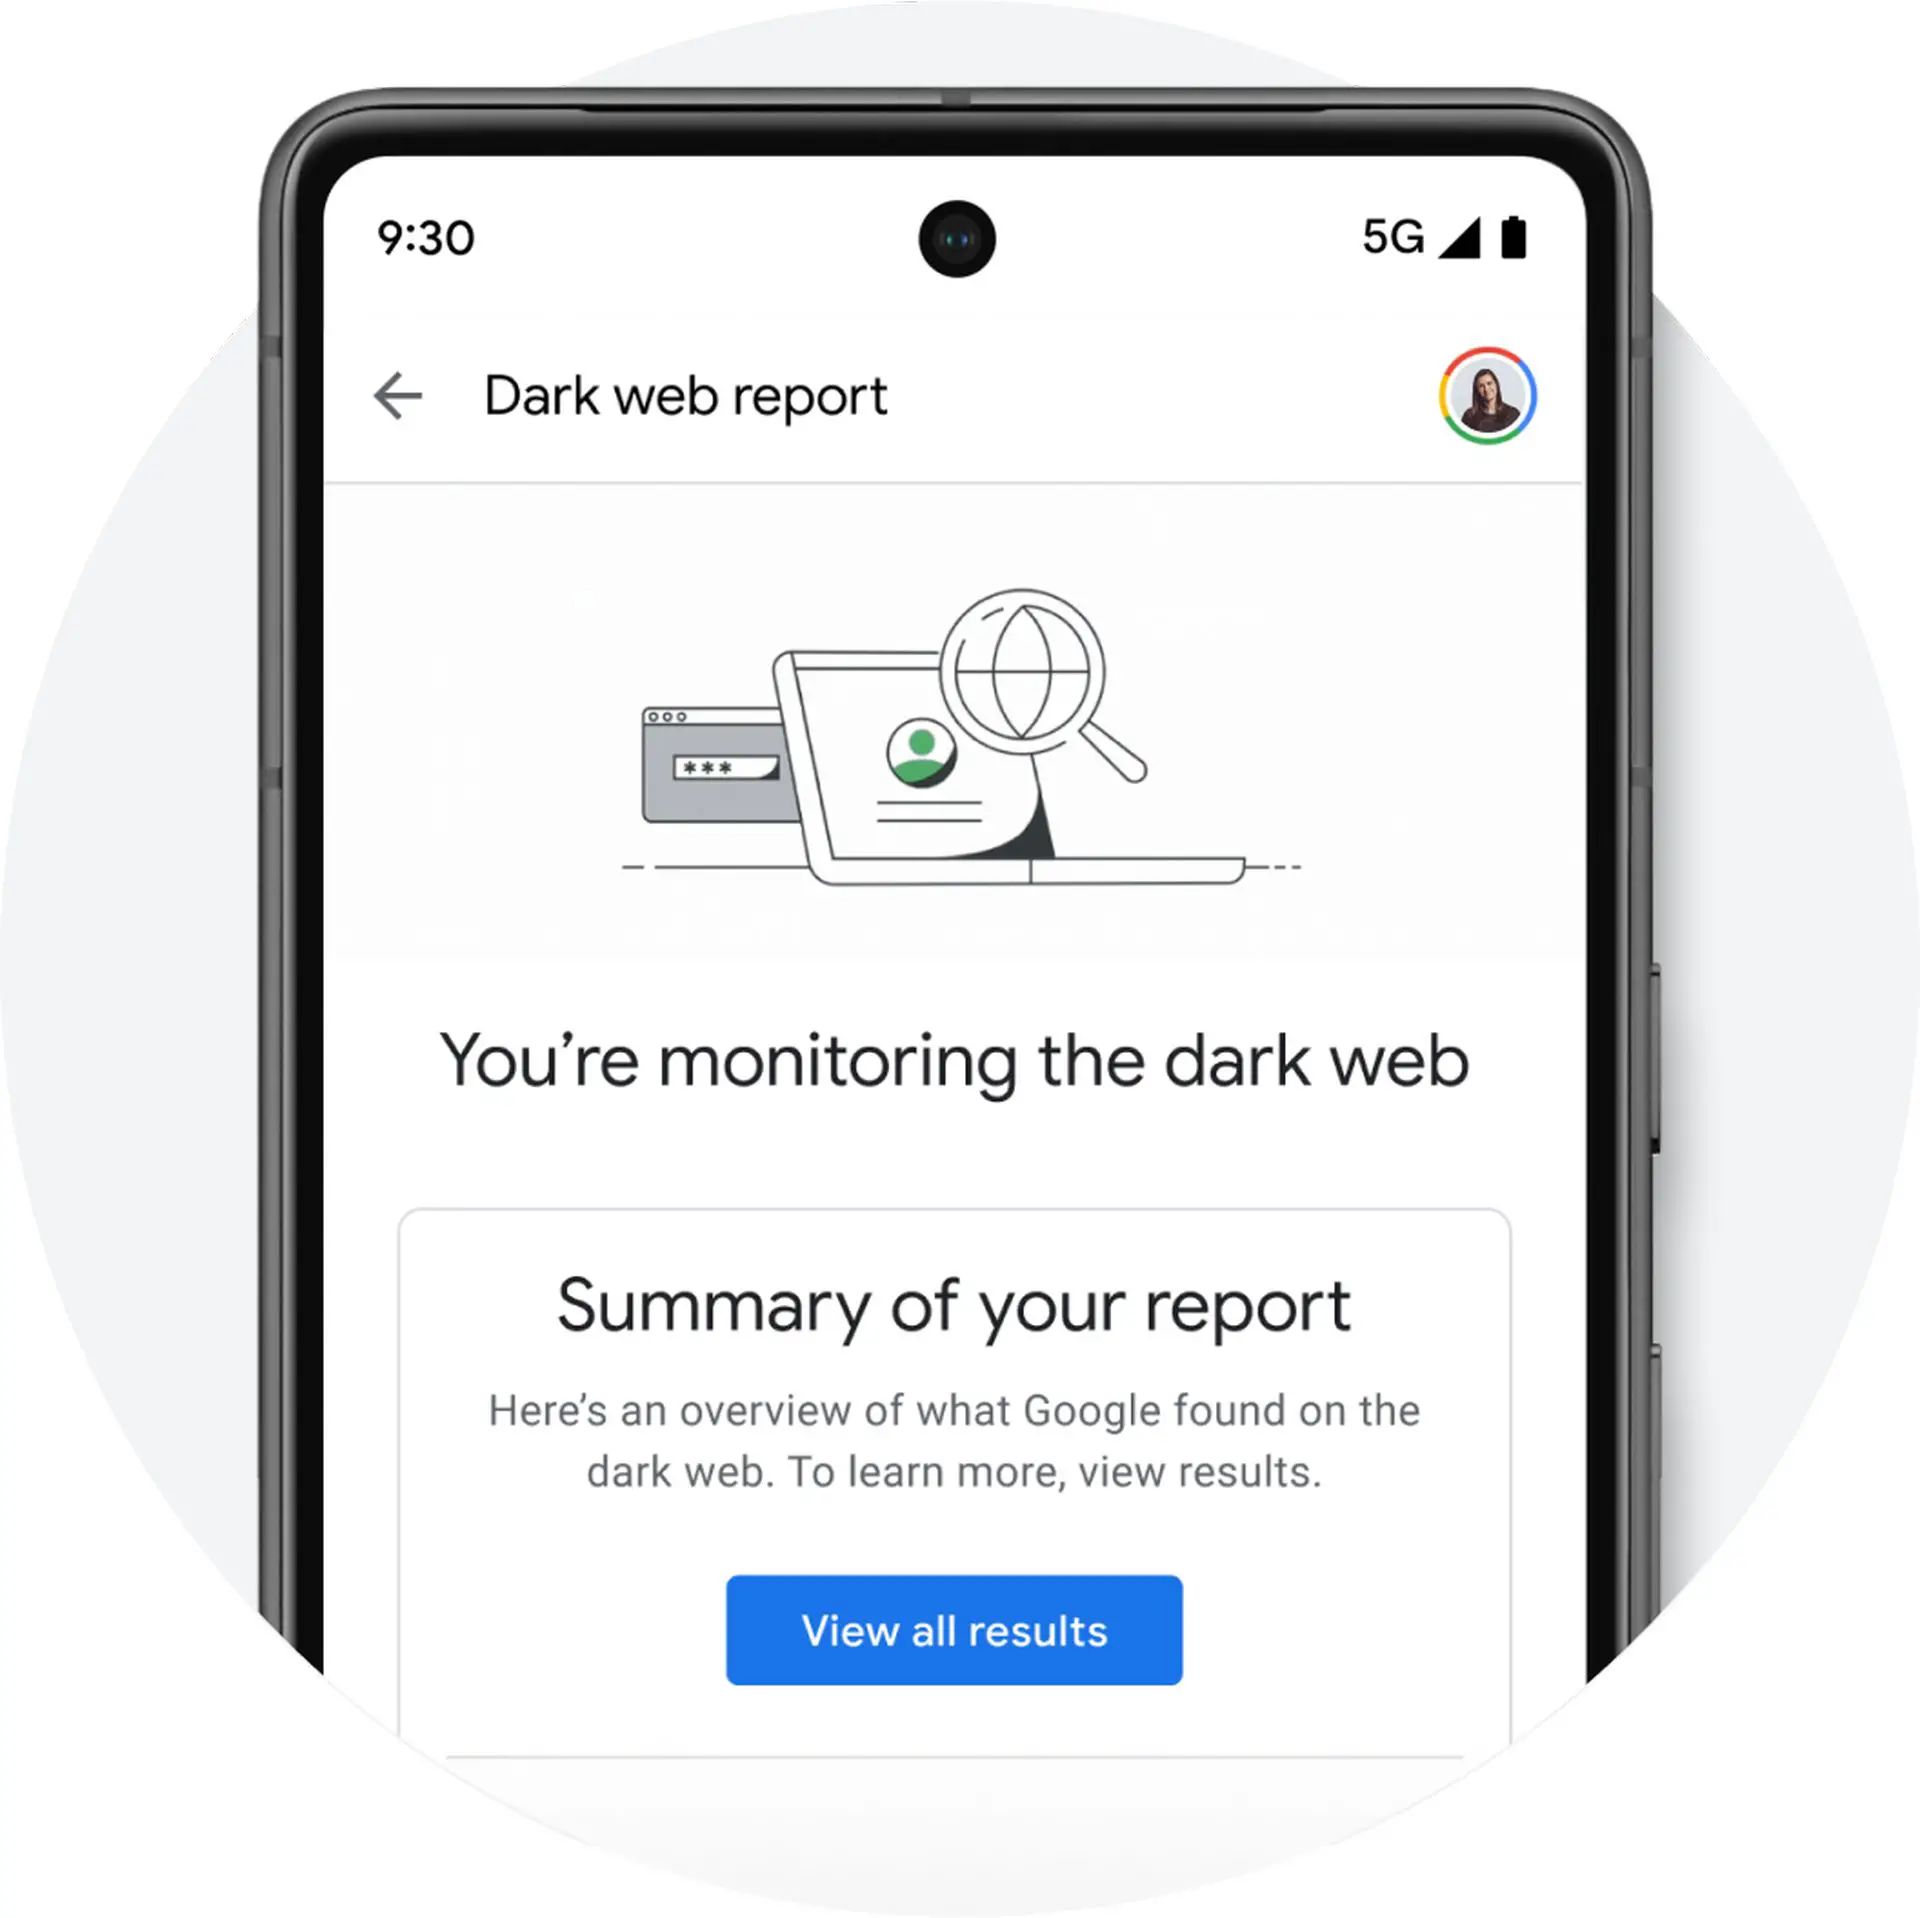 How does the Google One dark web report work?